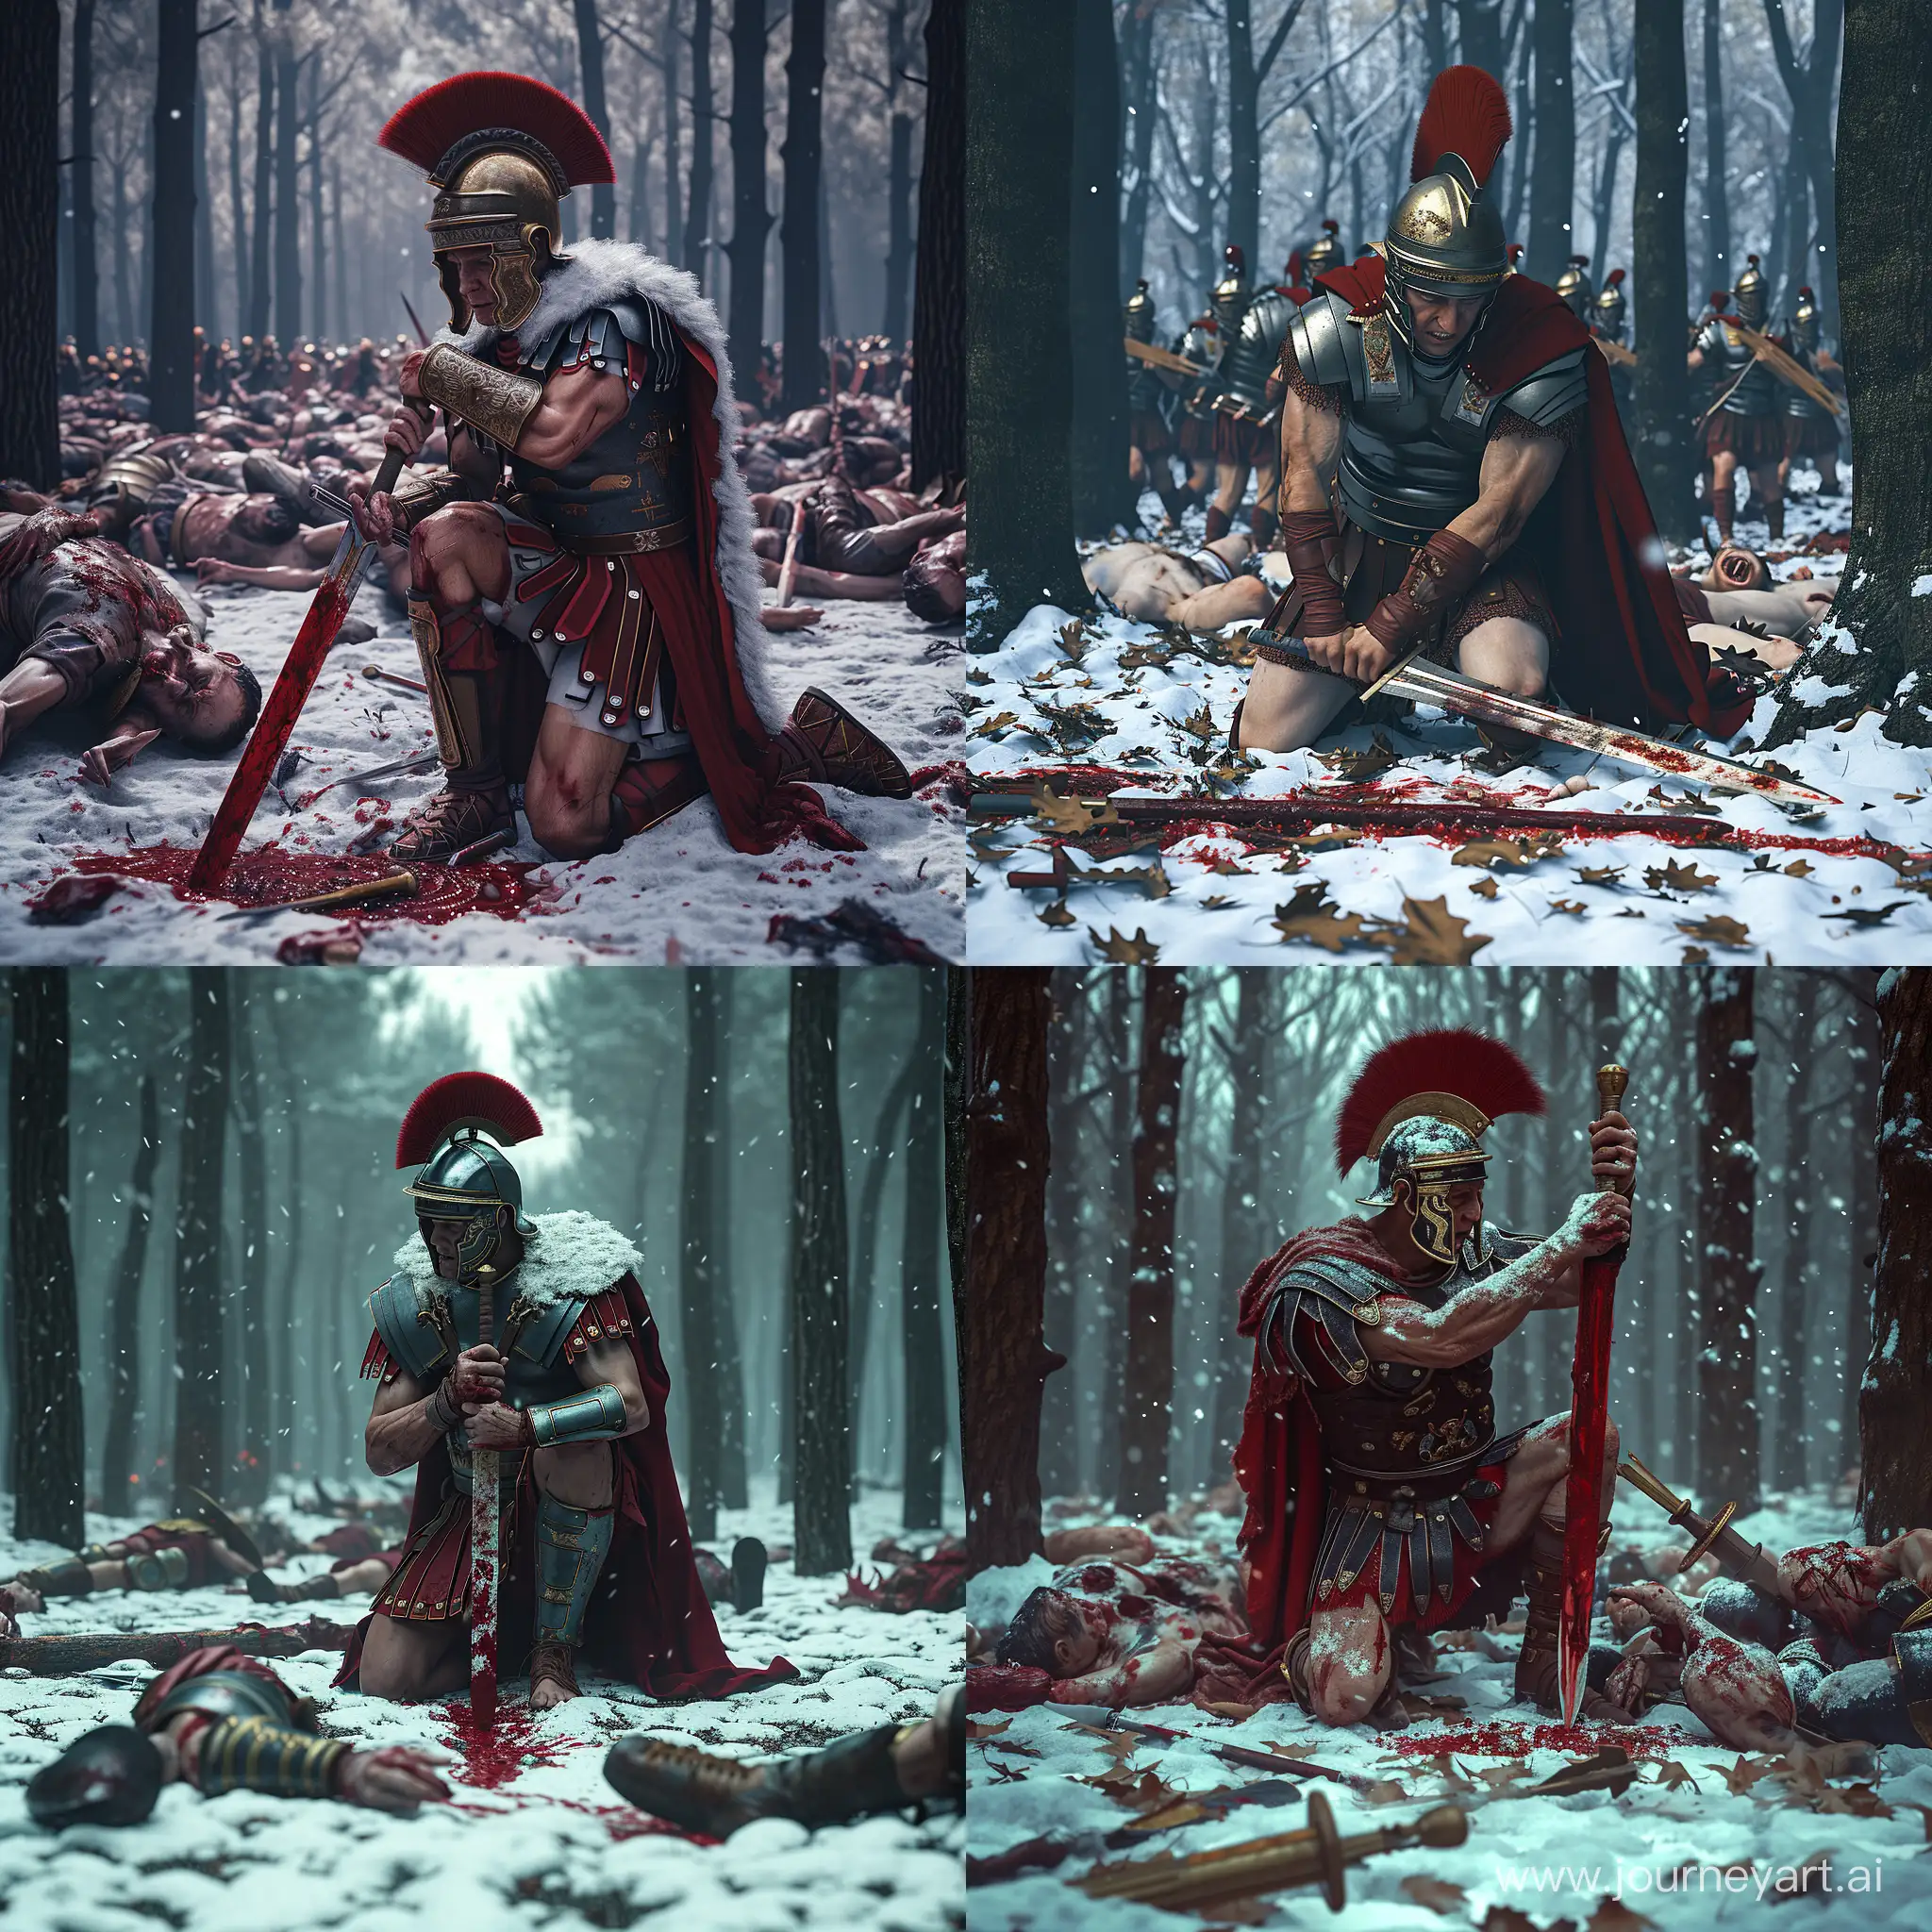 8K, V-Ray, realism, Full length portrait, a Roman legionary from the Roman Empire on his knees in a snowy forest holding a bloody sword with many legionary comrades dead on the ground